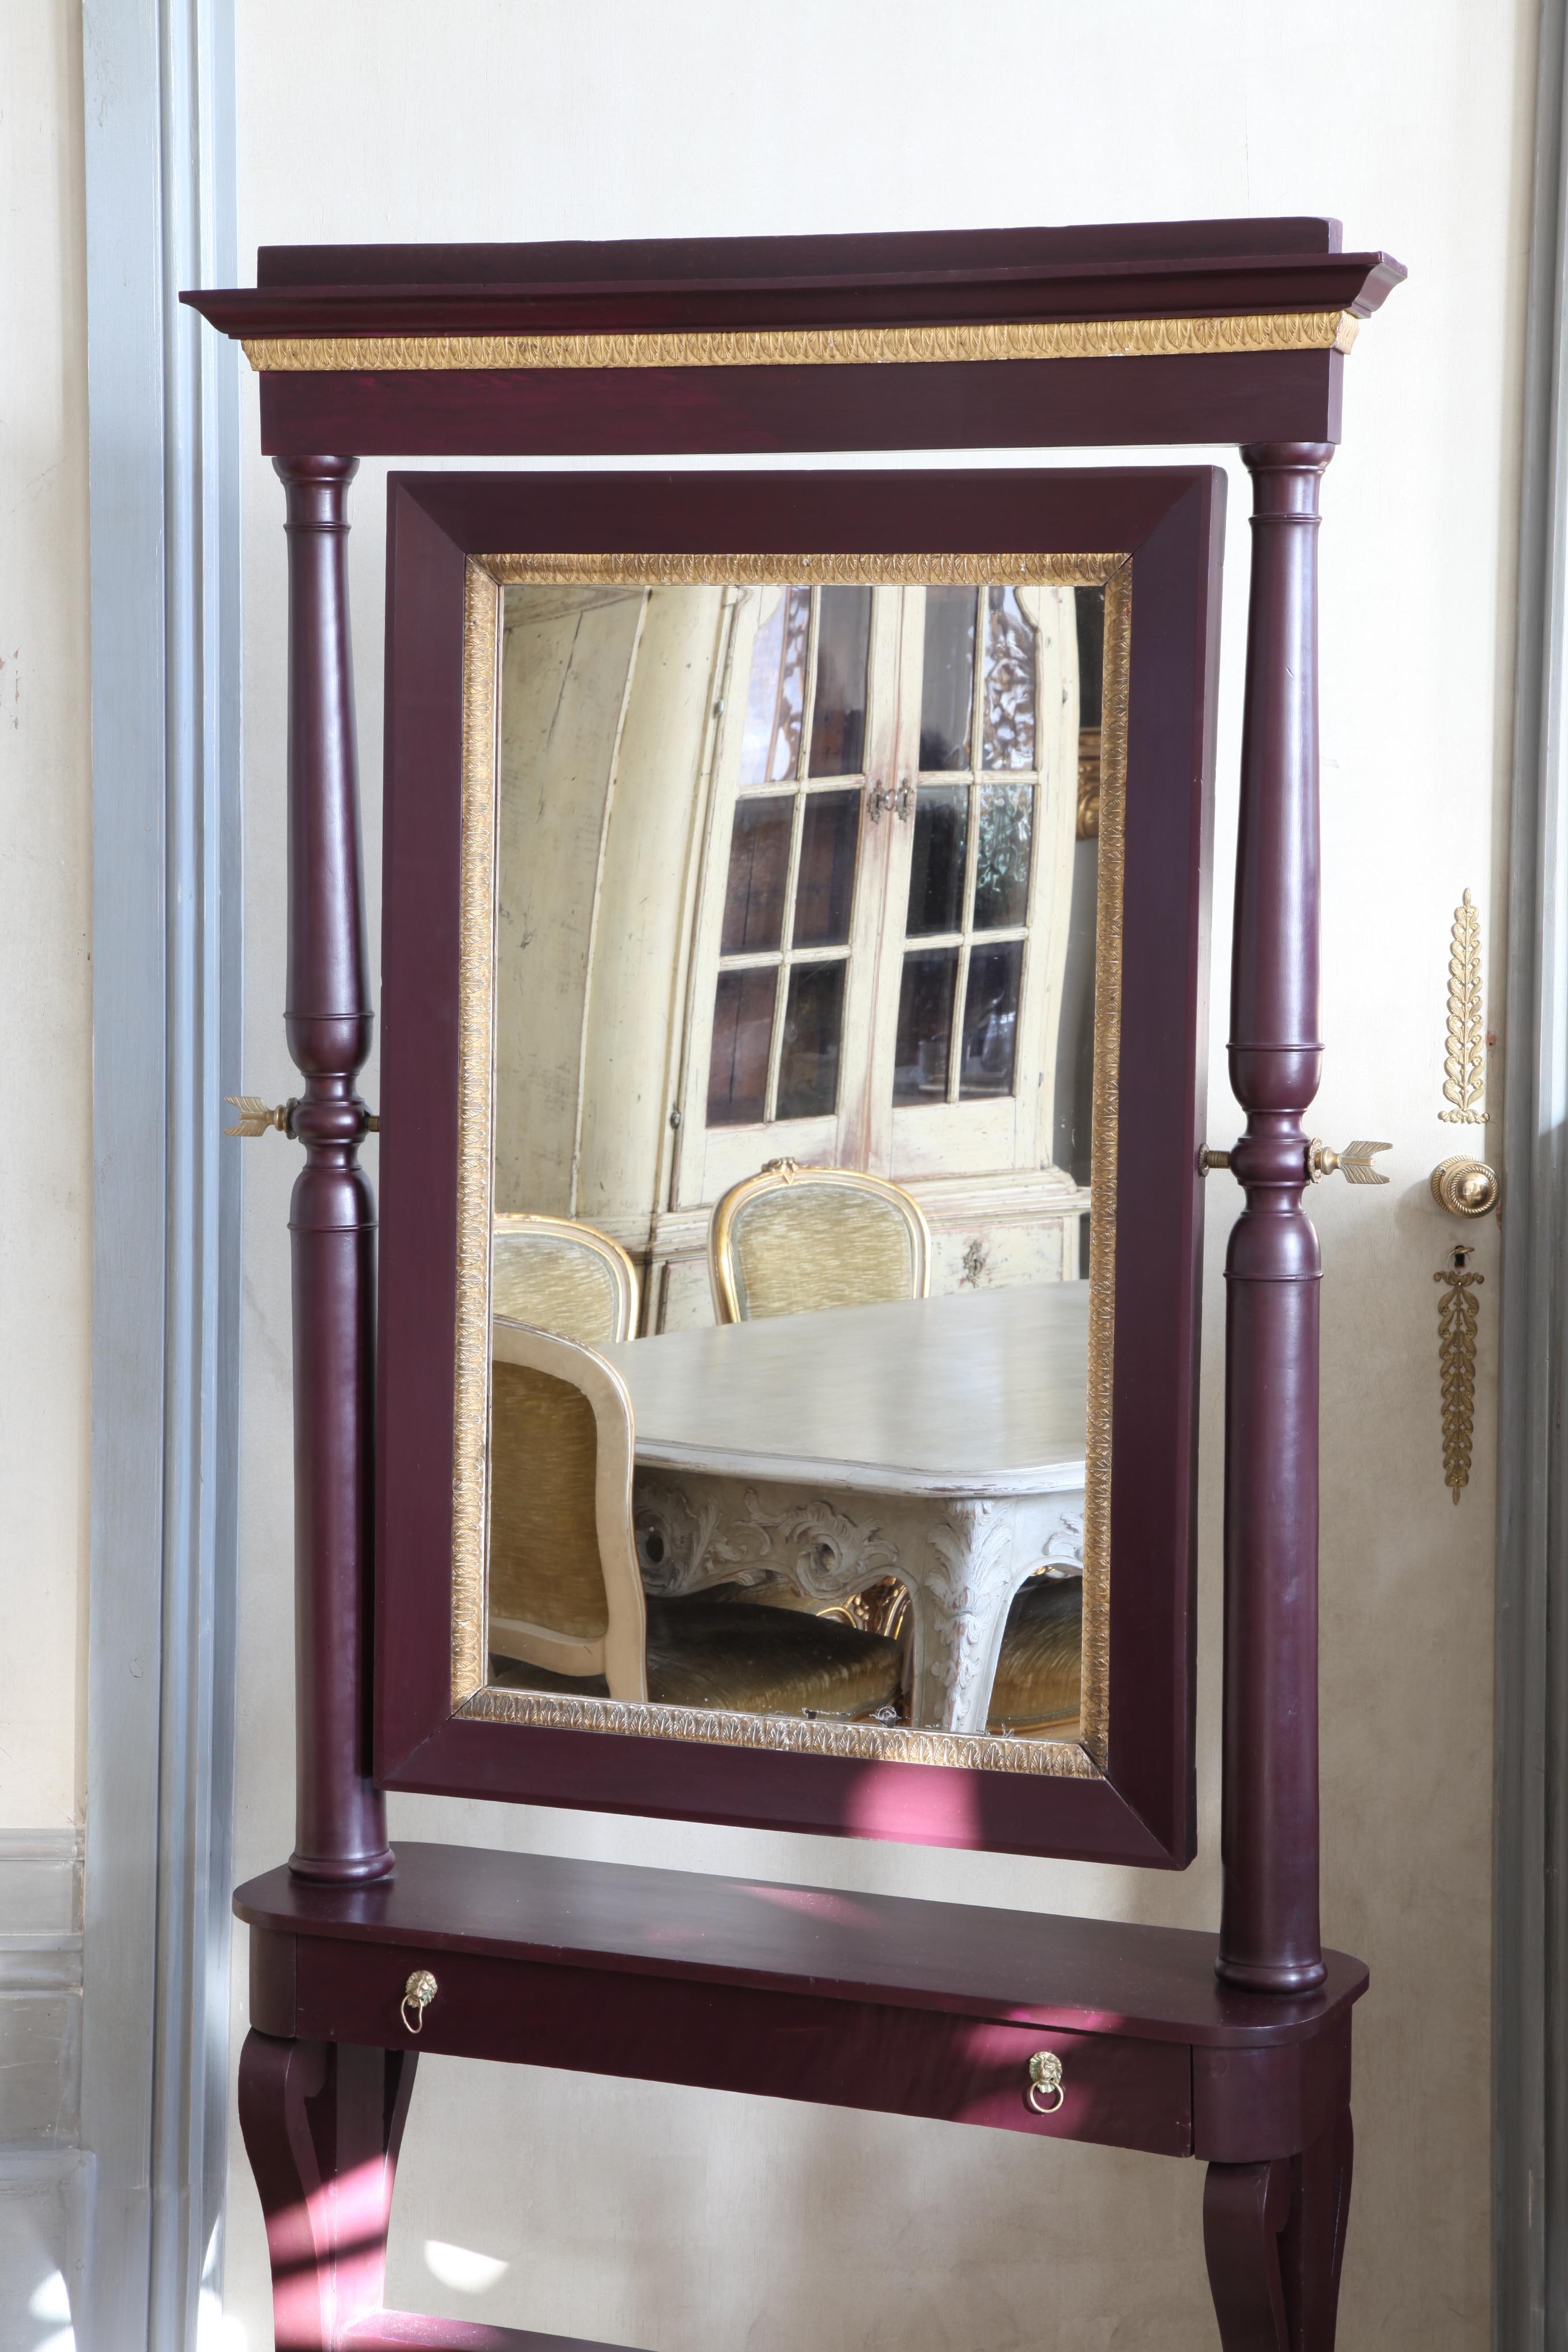 An elegant, 19th century, Italian cheval mirror made in both solid and veneered mahogany wood with hand carved giltwood mouldings and ormolu fittings. Fitted with neat drawer at the mirror.
Painted in a deep purple lacquer.